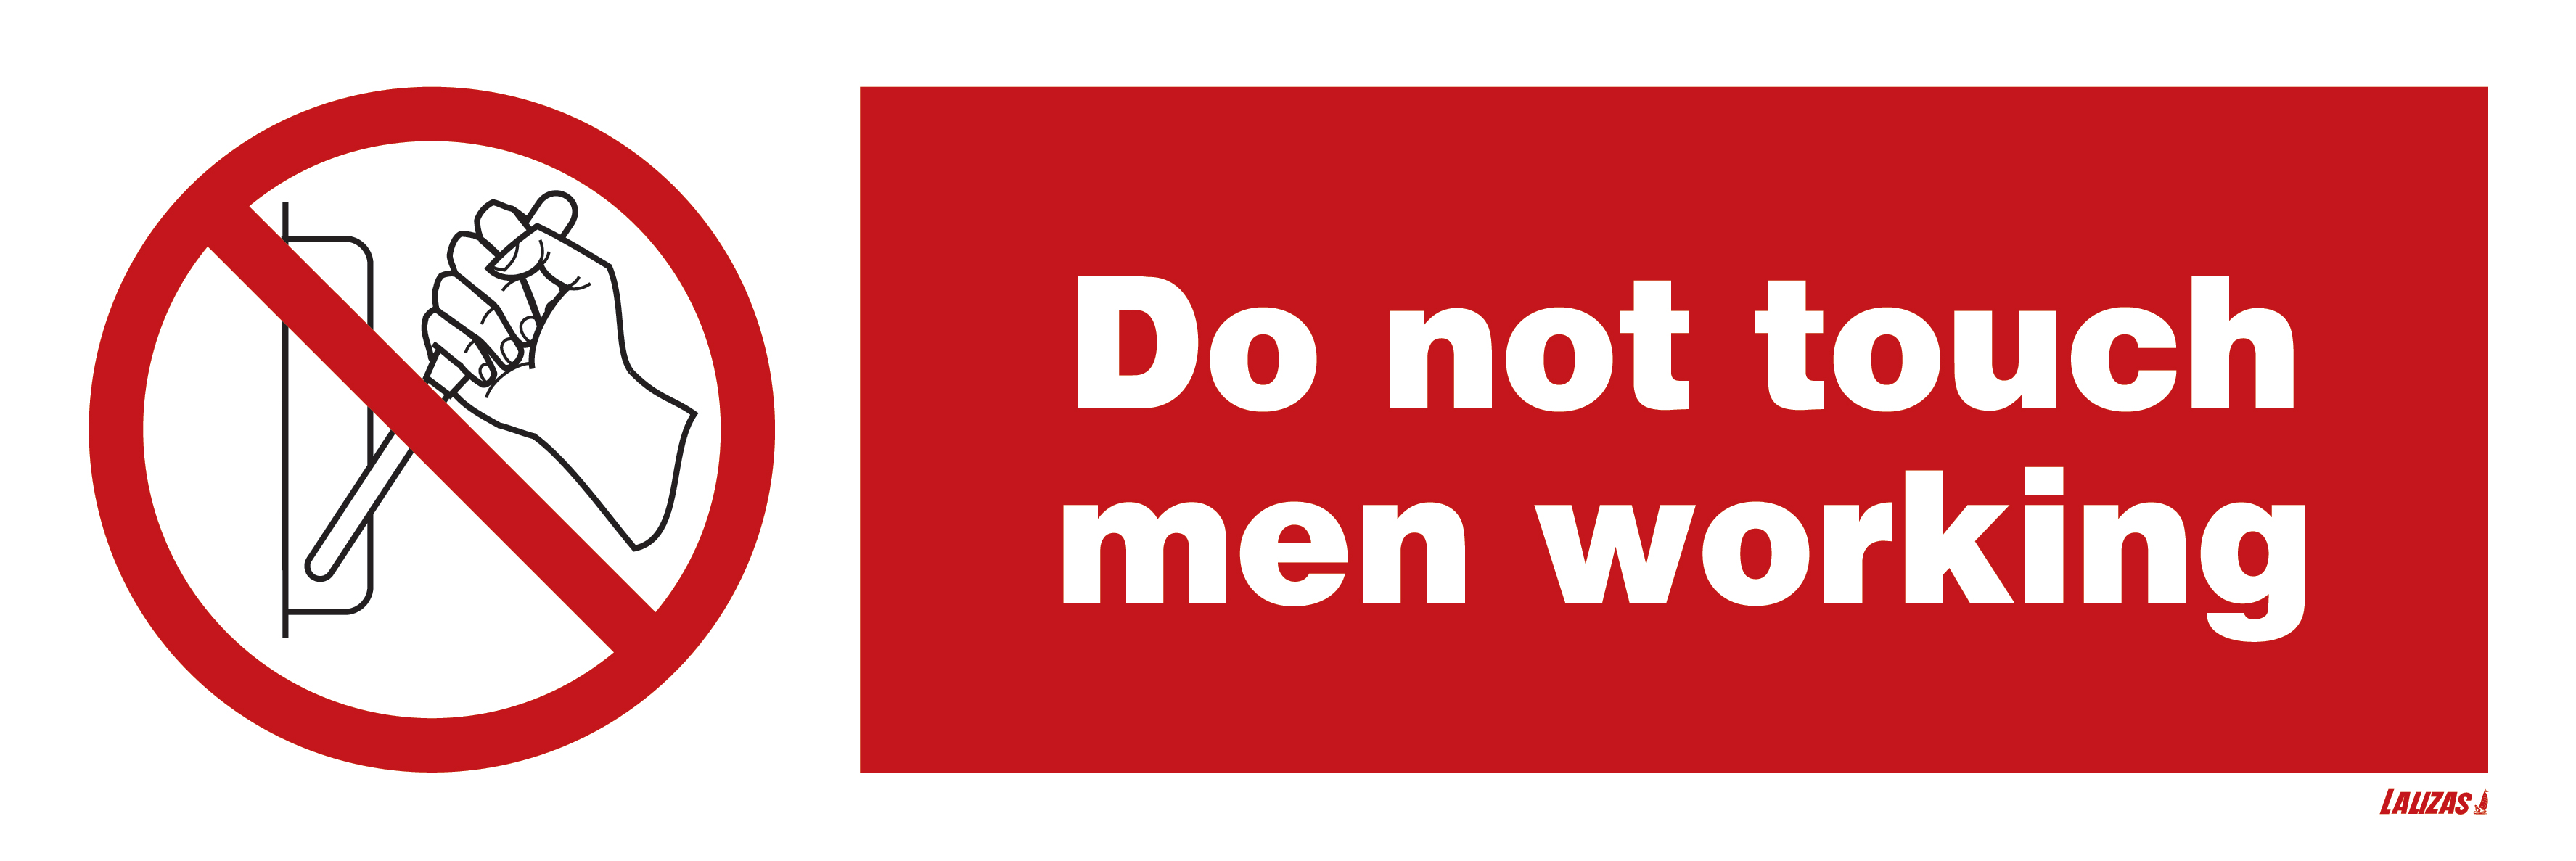 lalizas-imo-signs-do-not-touch-men-working-cliparts-co